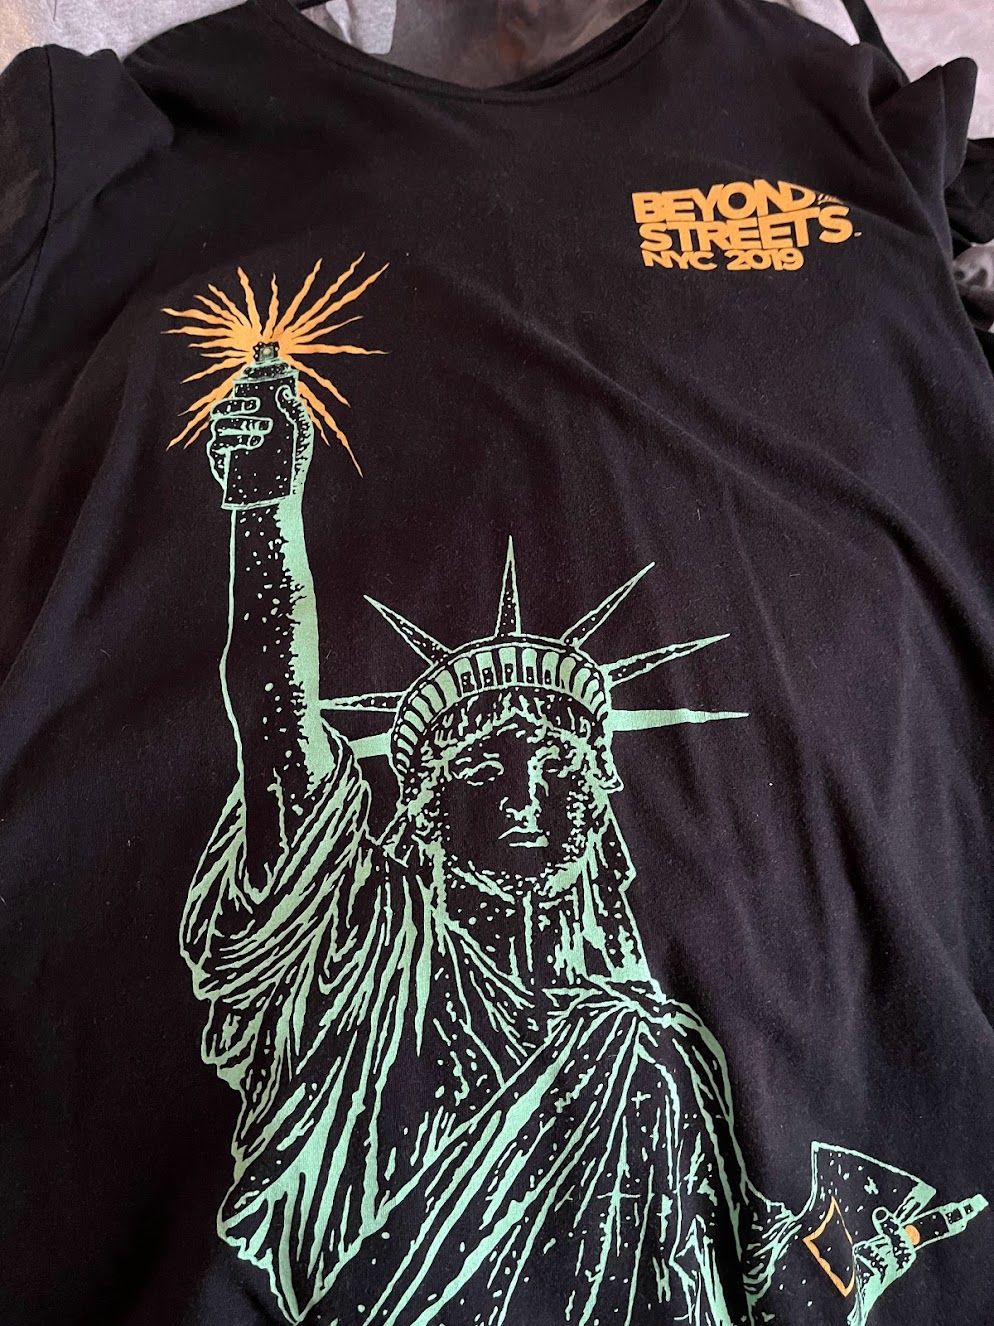 Statue of Liberty in graffiti t-shirt from Beyond the Streets exhibition